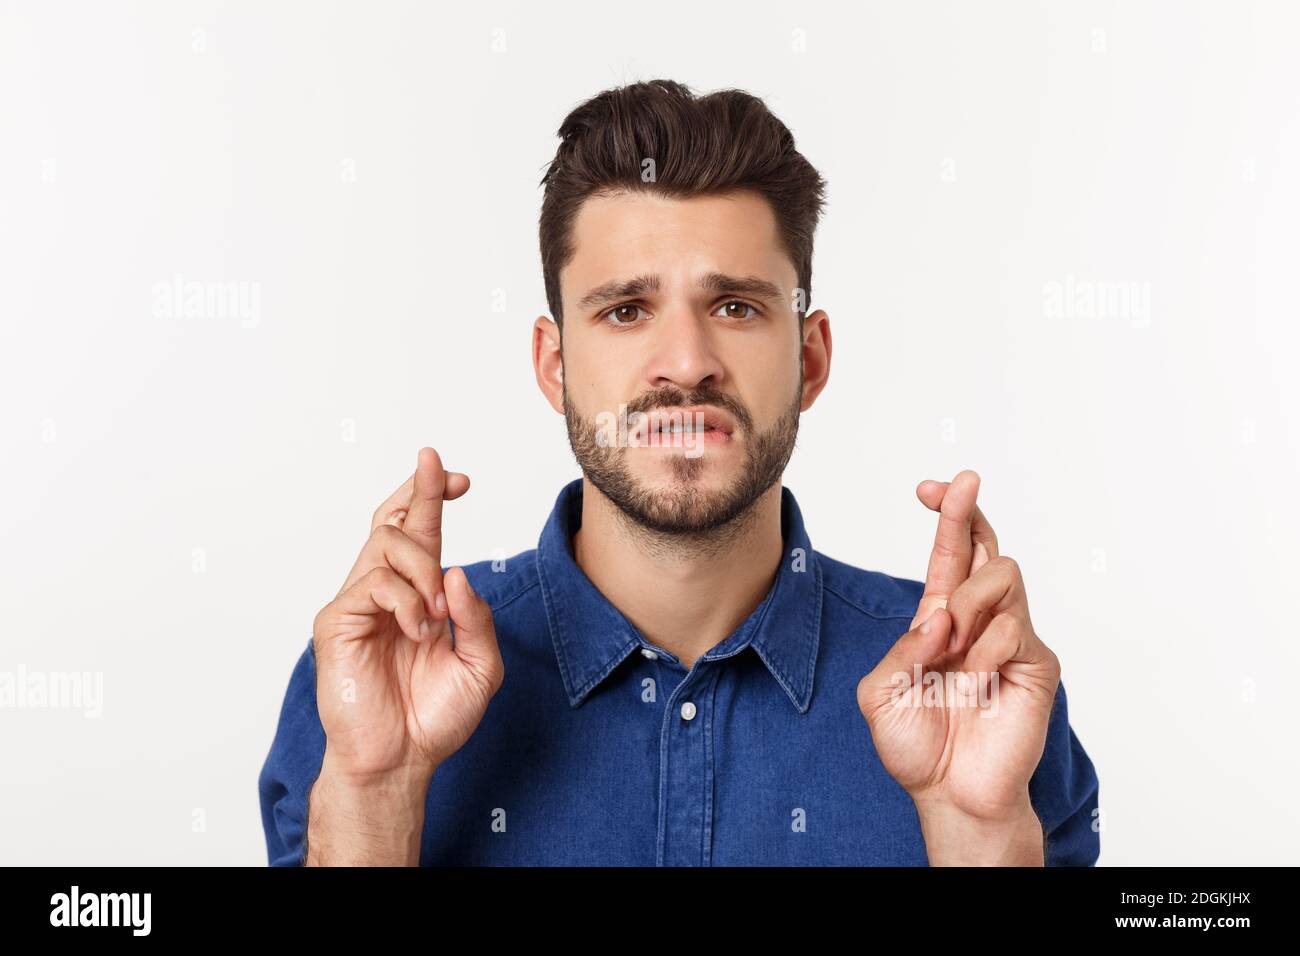 Close up portrait of disappointed stressed bearded young man in shirt over white background. Stock Photo